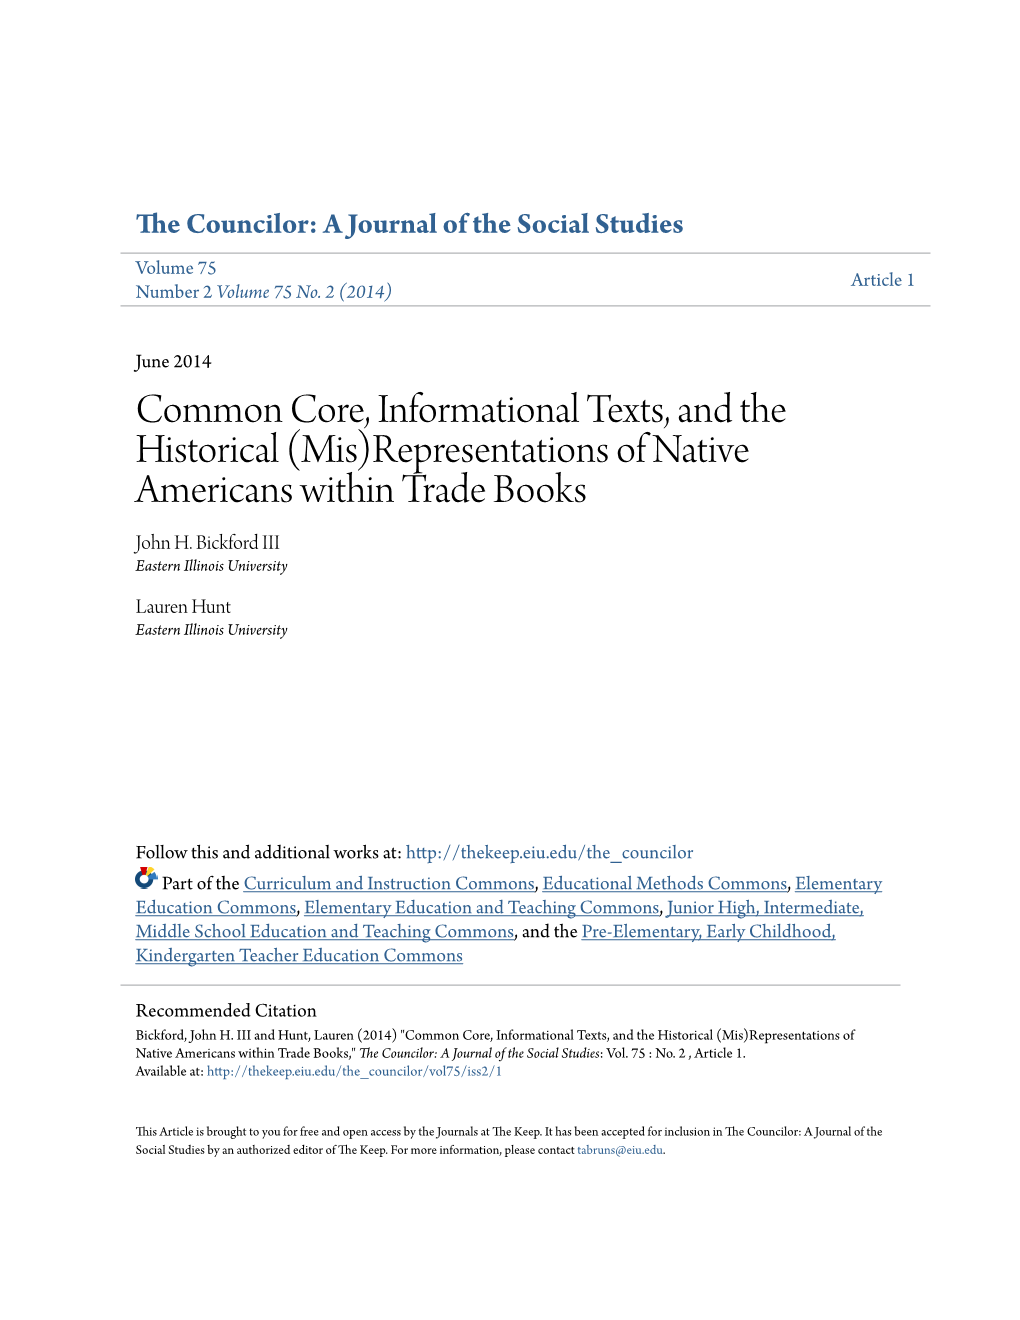 Common Core, Informational Texts, and the Historical (Mis)Representations of Native Americans Within Trade Books John H